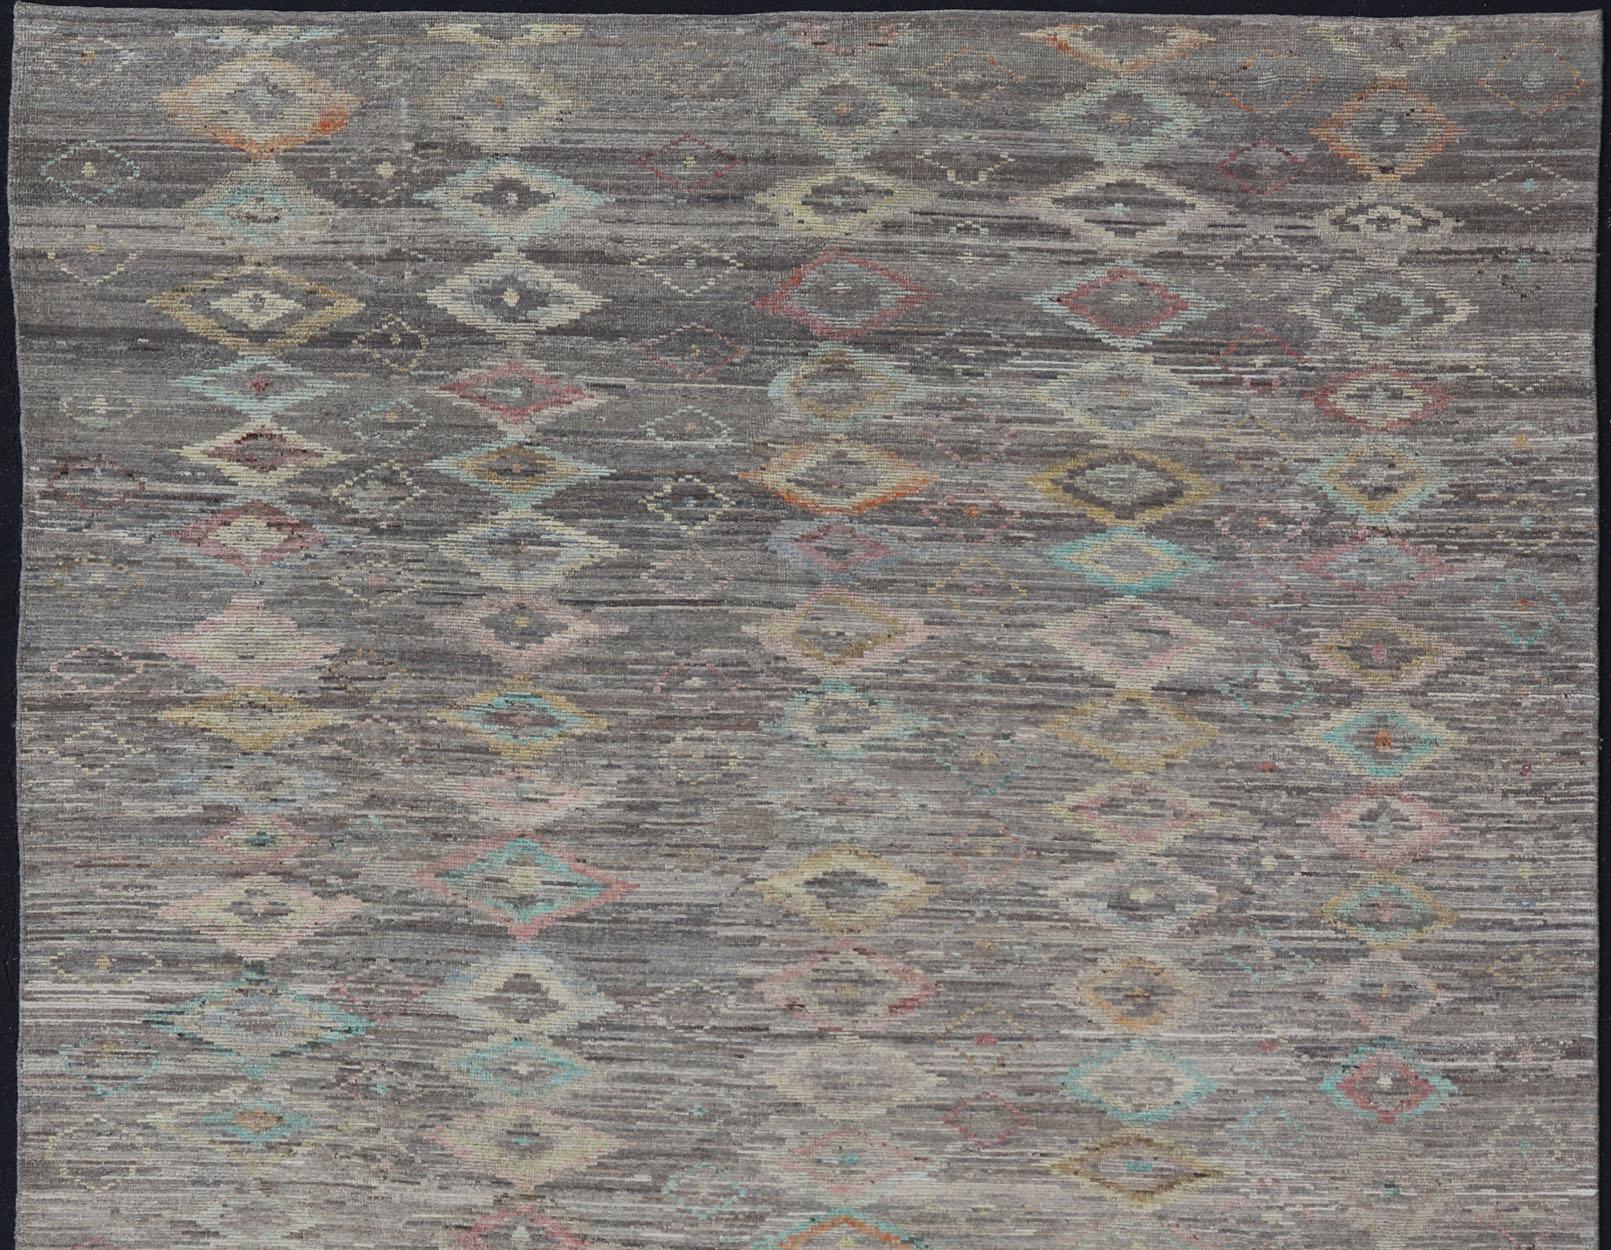 Casual modern design rug with faded pop of colors on a neutral and gray tone background, Keivan Woven Arts / rug AFG-36117, country of origin / type: Afghanistan / Moroccan tribal, modern casual.

The design of this piled rug makes it perfect for